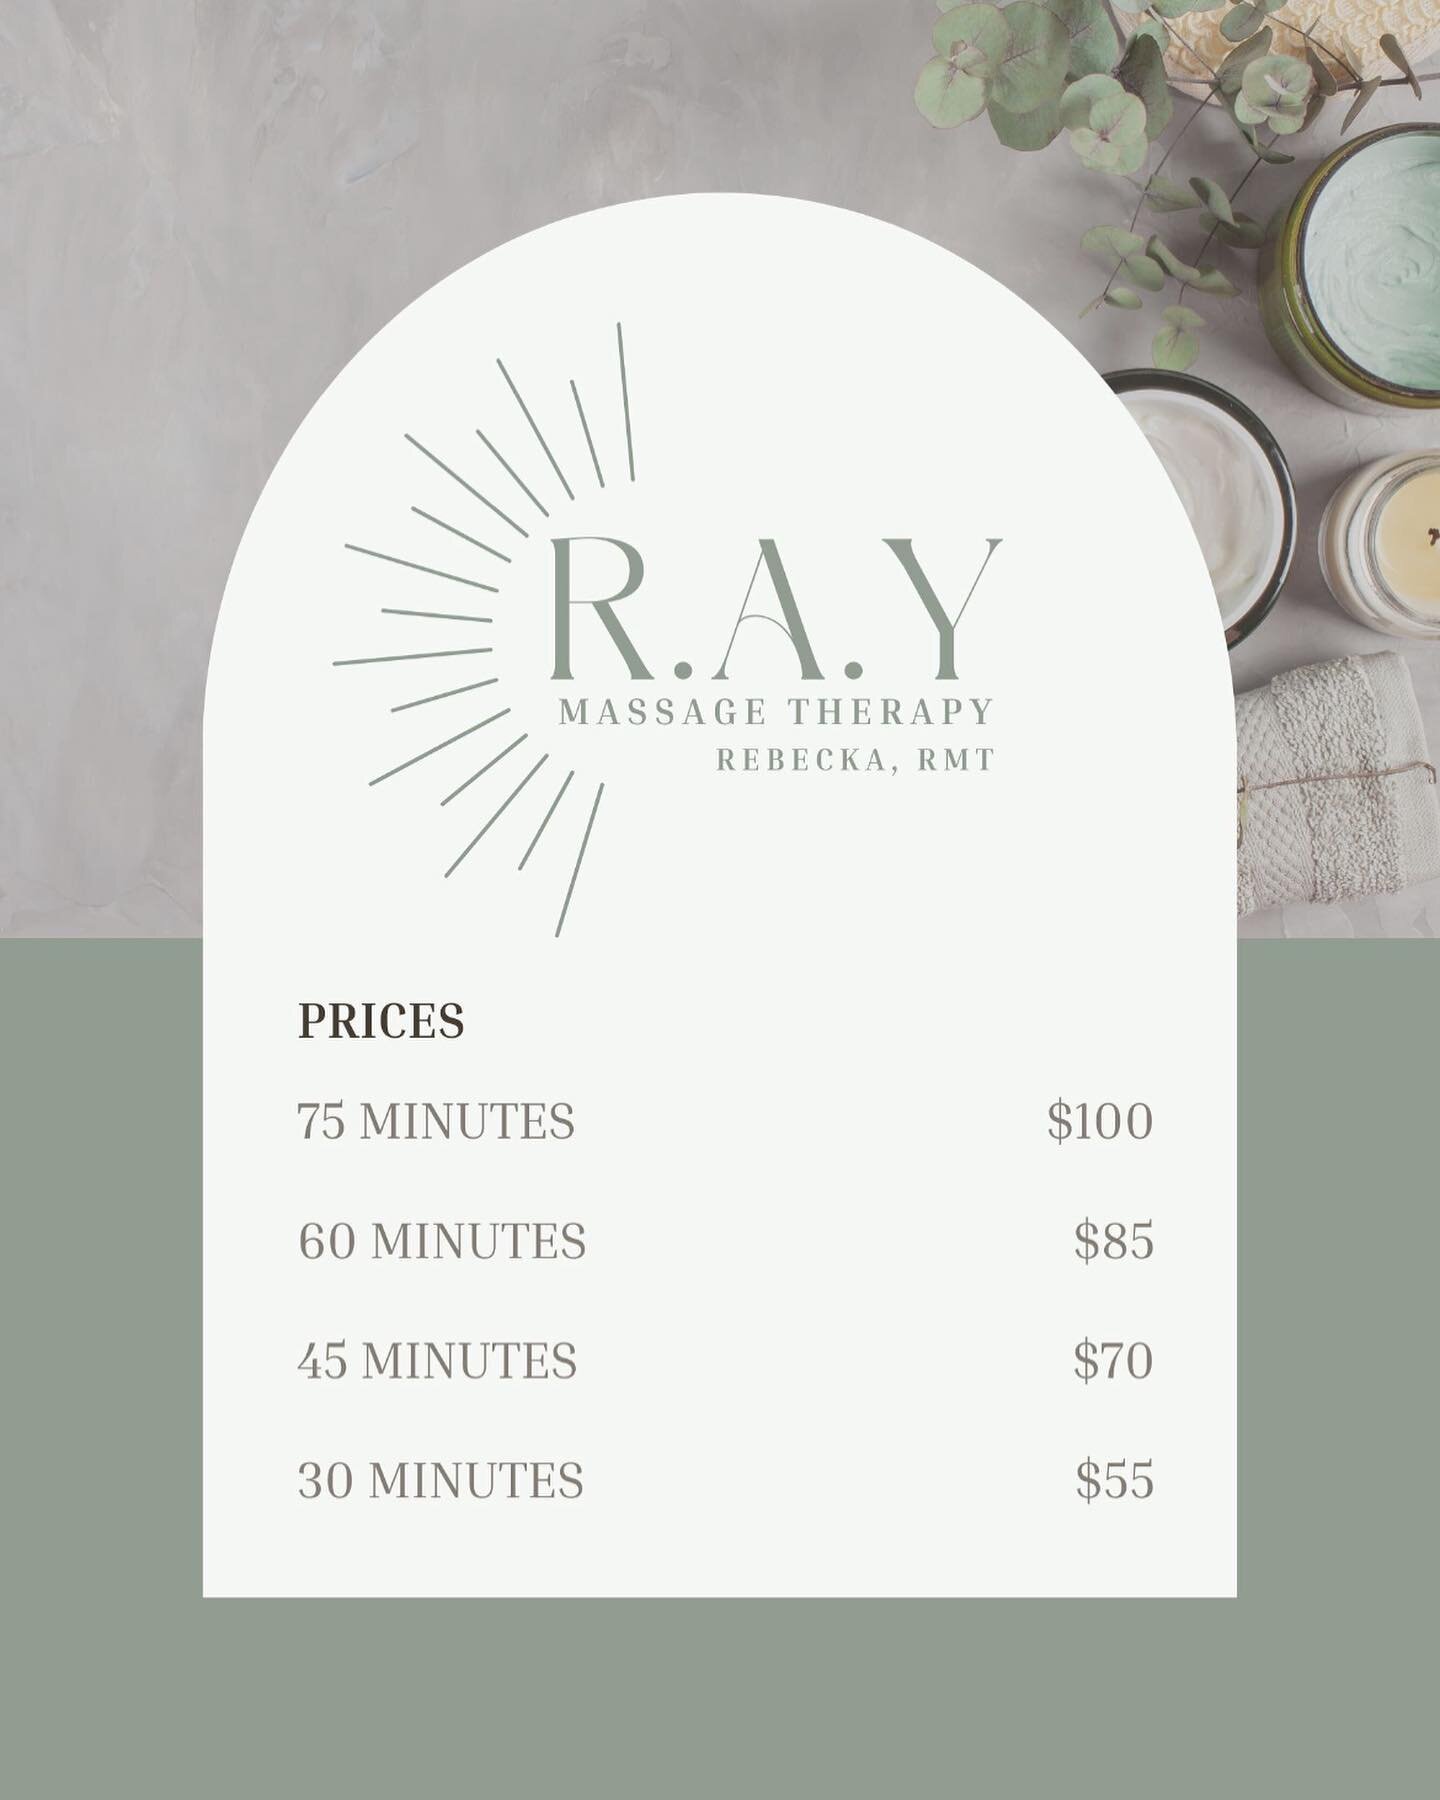 I am so excited to announce that @ray.massagetherapy will be joining the DIVA Lounge team offering Registered Massage Therapy!
Online booking is now open!
#massageniagara #rmt #relaxtime #massagetherapy